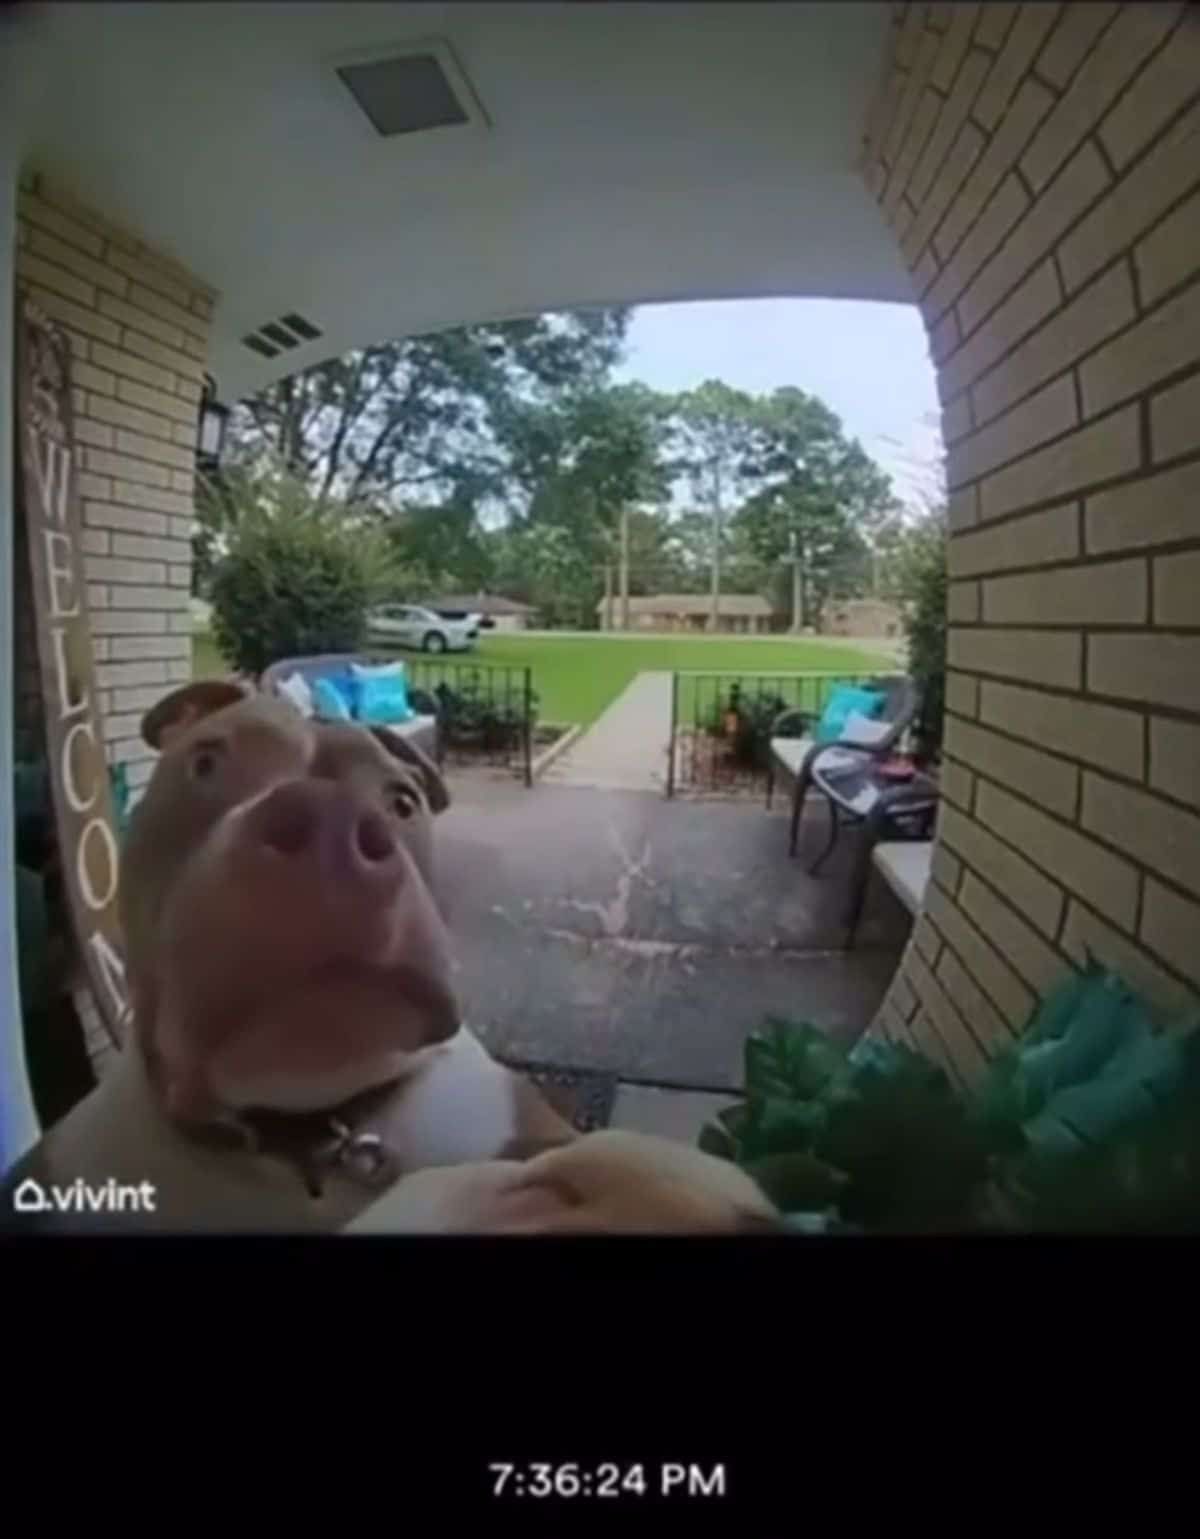 brown and white pitbull seen through a camera at a front door